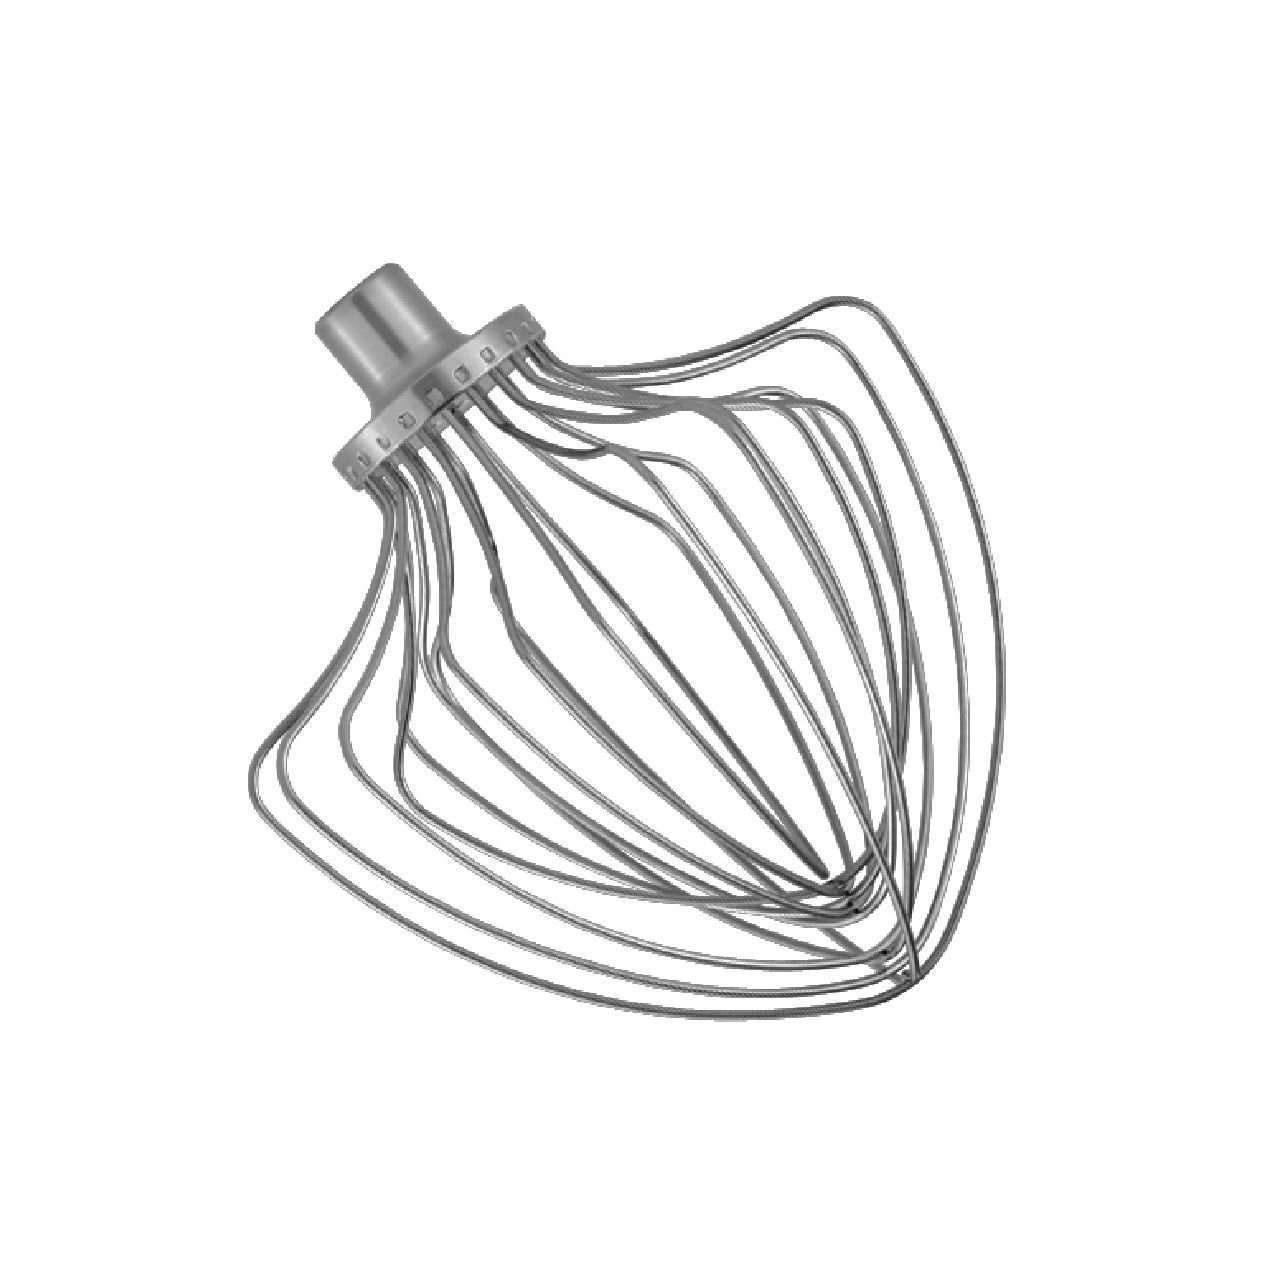 https://cdn.everythingkitchens.com/media/catalog/product/cache/70d878061ea71e5b62358b2b67547186/k/n/kn211ww_kitchenaid_11_inch_stainless_steel_wire_whip.jpg